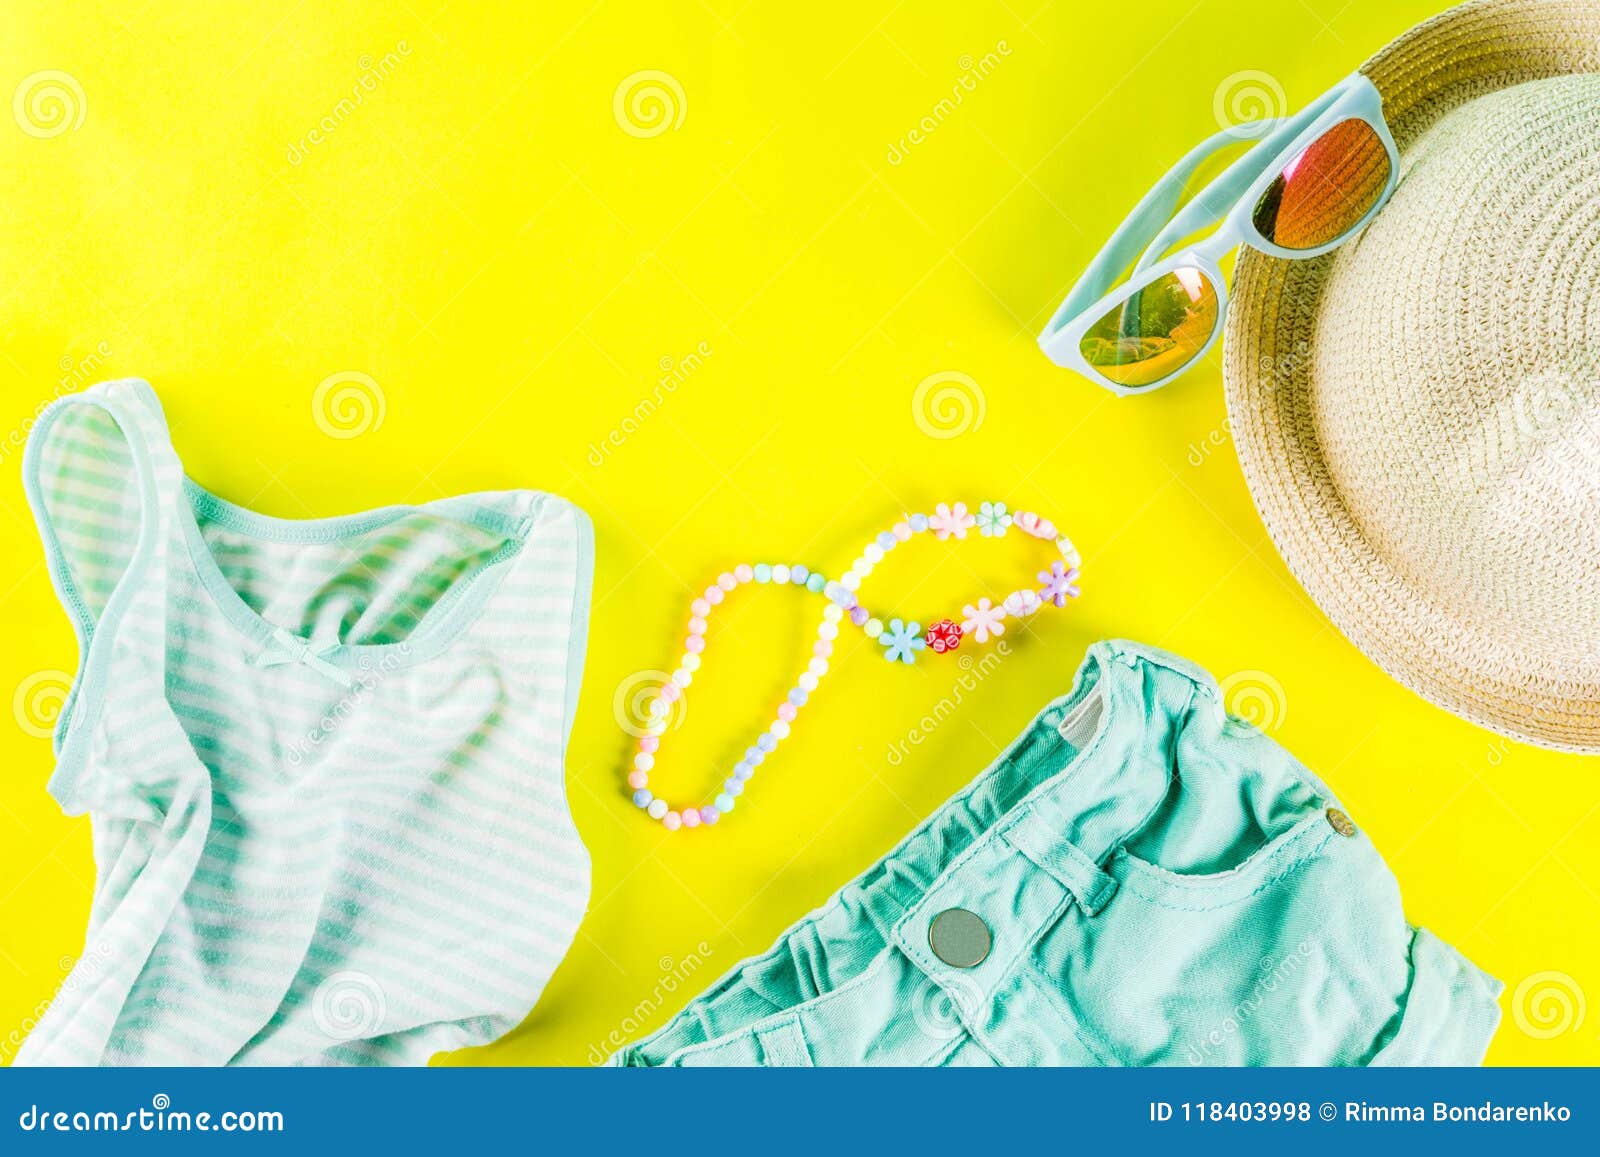 Summer kids cloth set stock photo. Image of outfit, jeans - 118403998